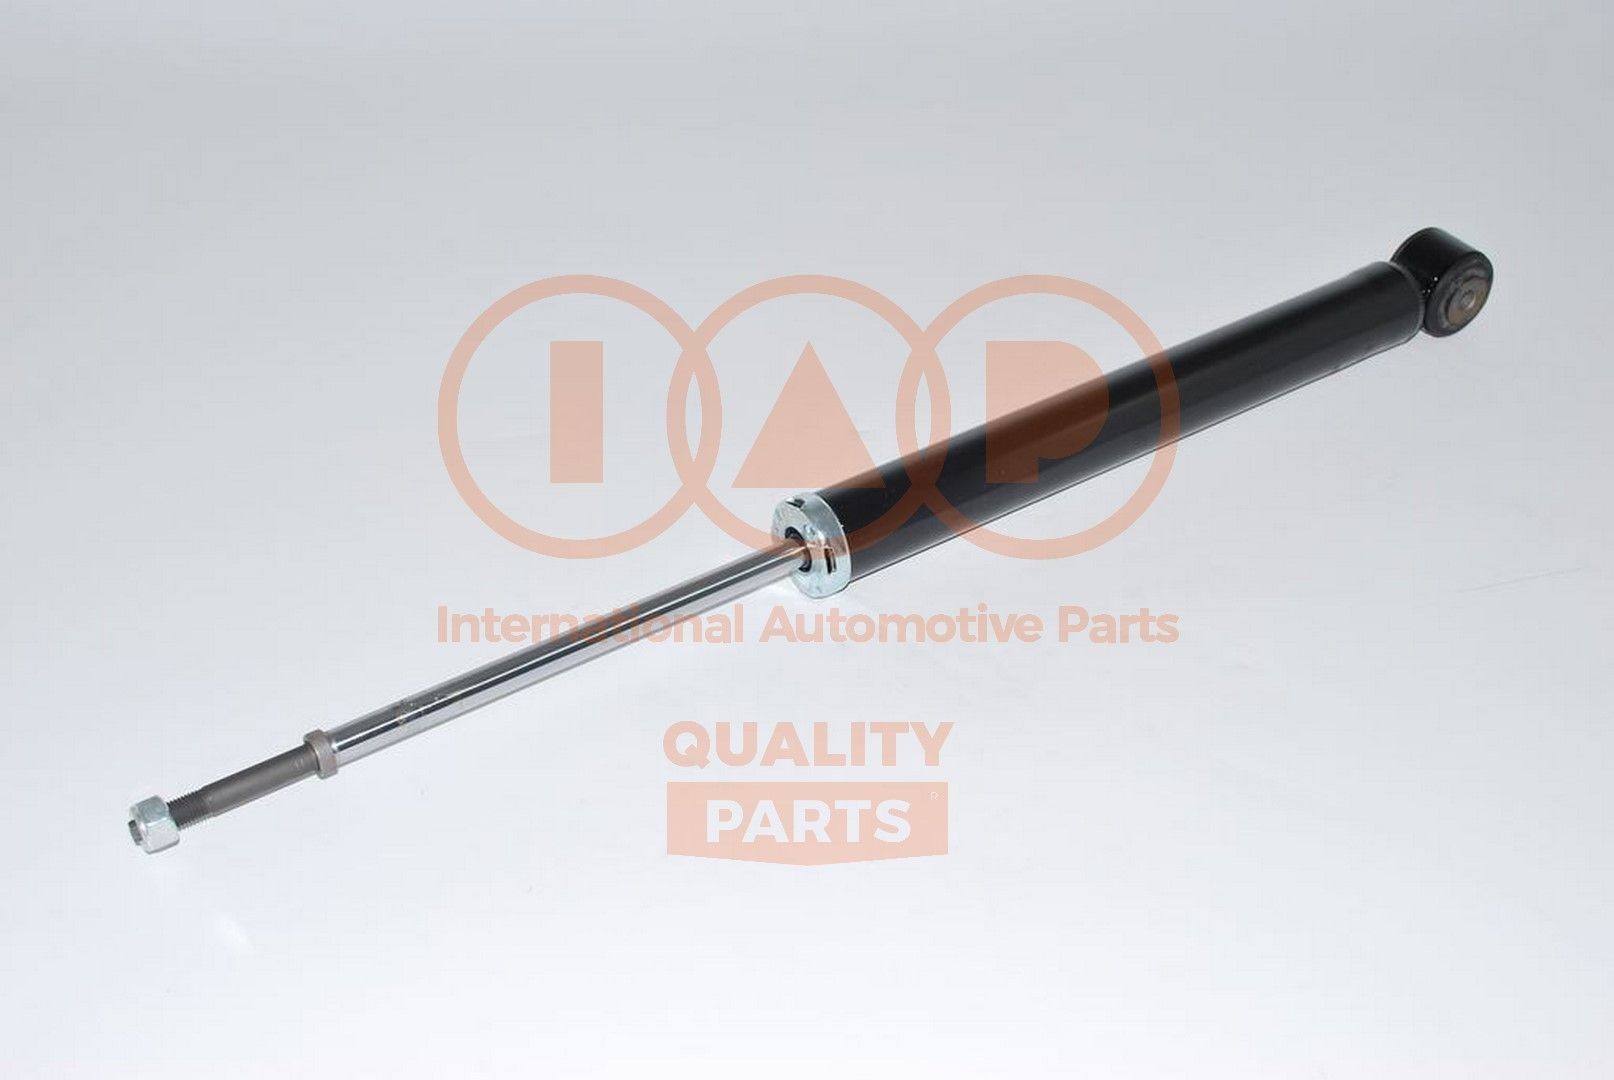 IAP QUALITY PARTS 504-17182 Shock absorber 48530-80384